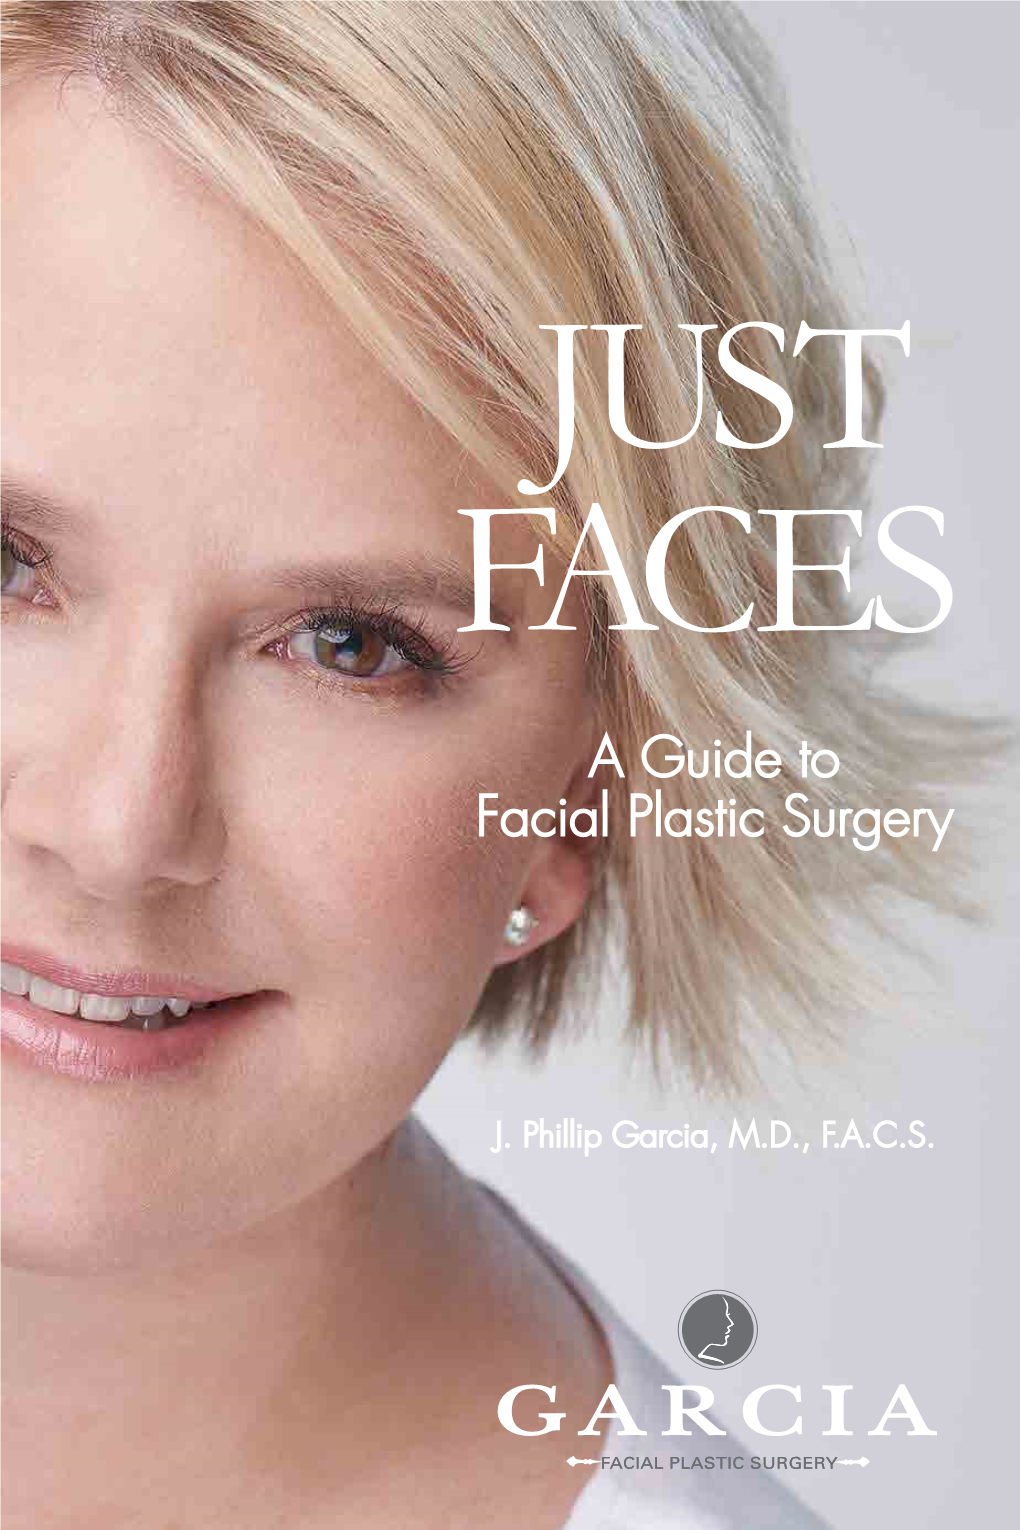 A Guide to Facial Plastic Surgery